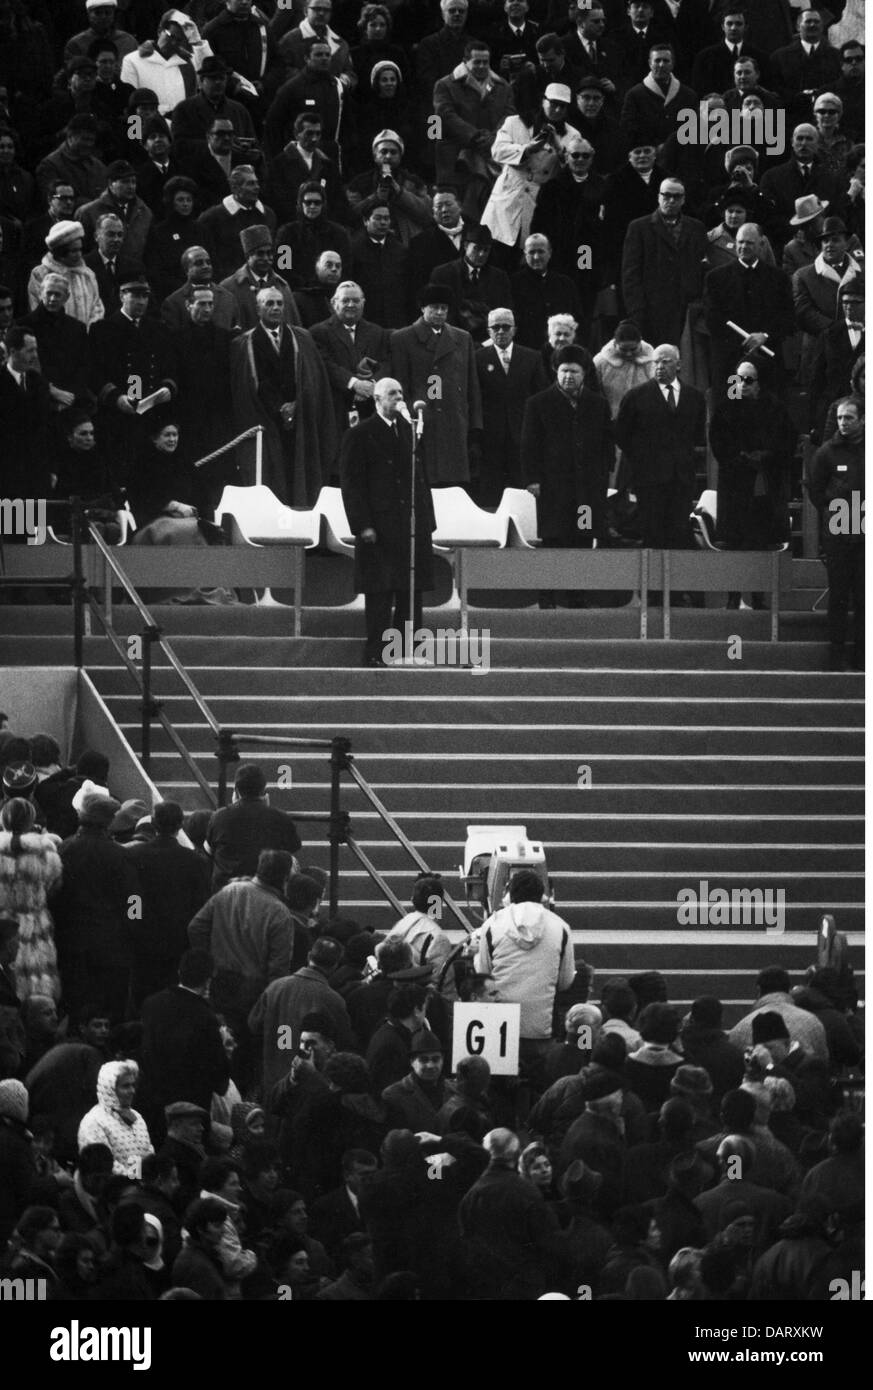 sport, Olympic Games, Grenoble, 6.2.1968 - 18.23.1968, opening, speech of President Charles de Gaulle, 6.2.1968, guests of honour, press, television, TV camera, X olympiad, winter games, France, 20th century, historic, historical, people, 1960s, Additional-Rights-Clearences-Not Available Stock Photo